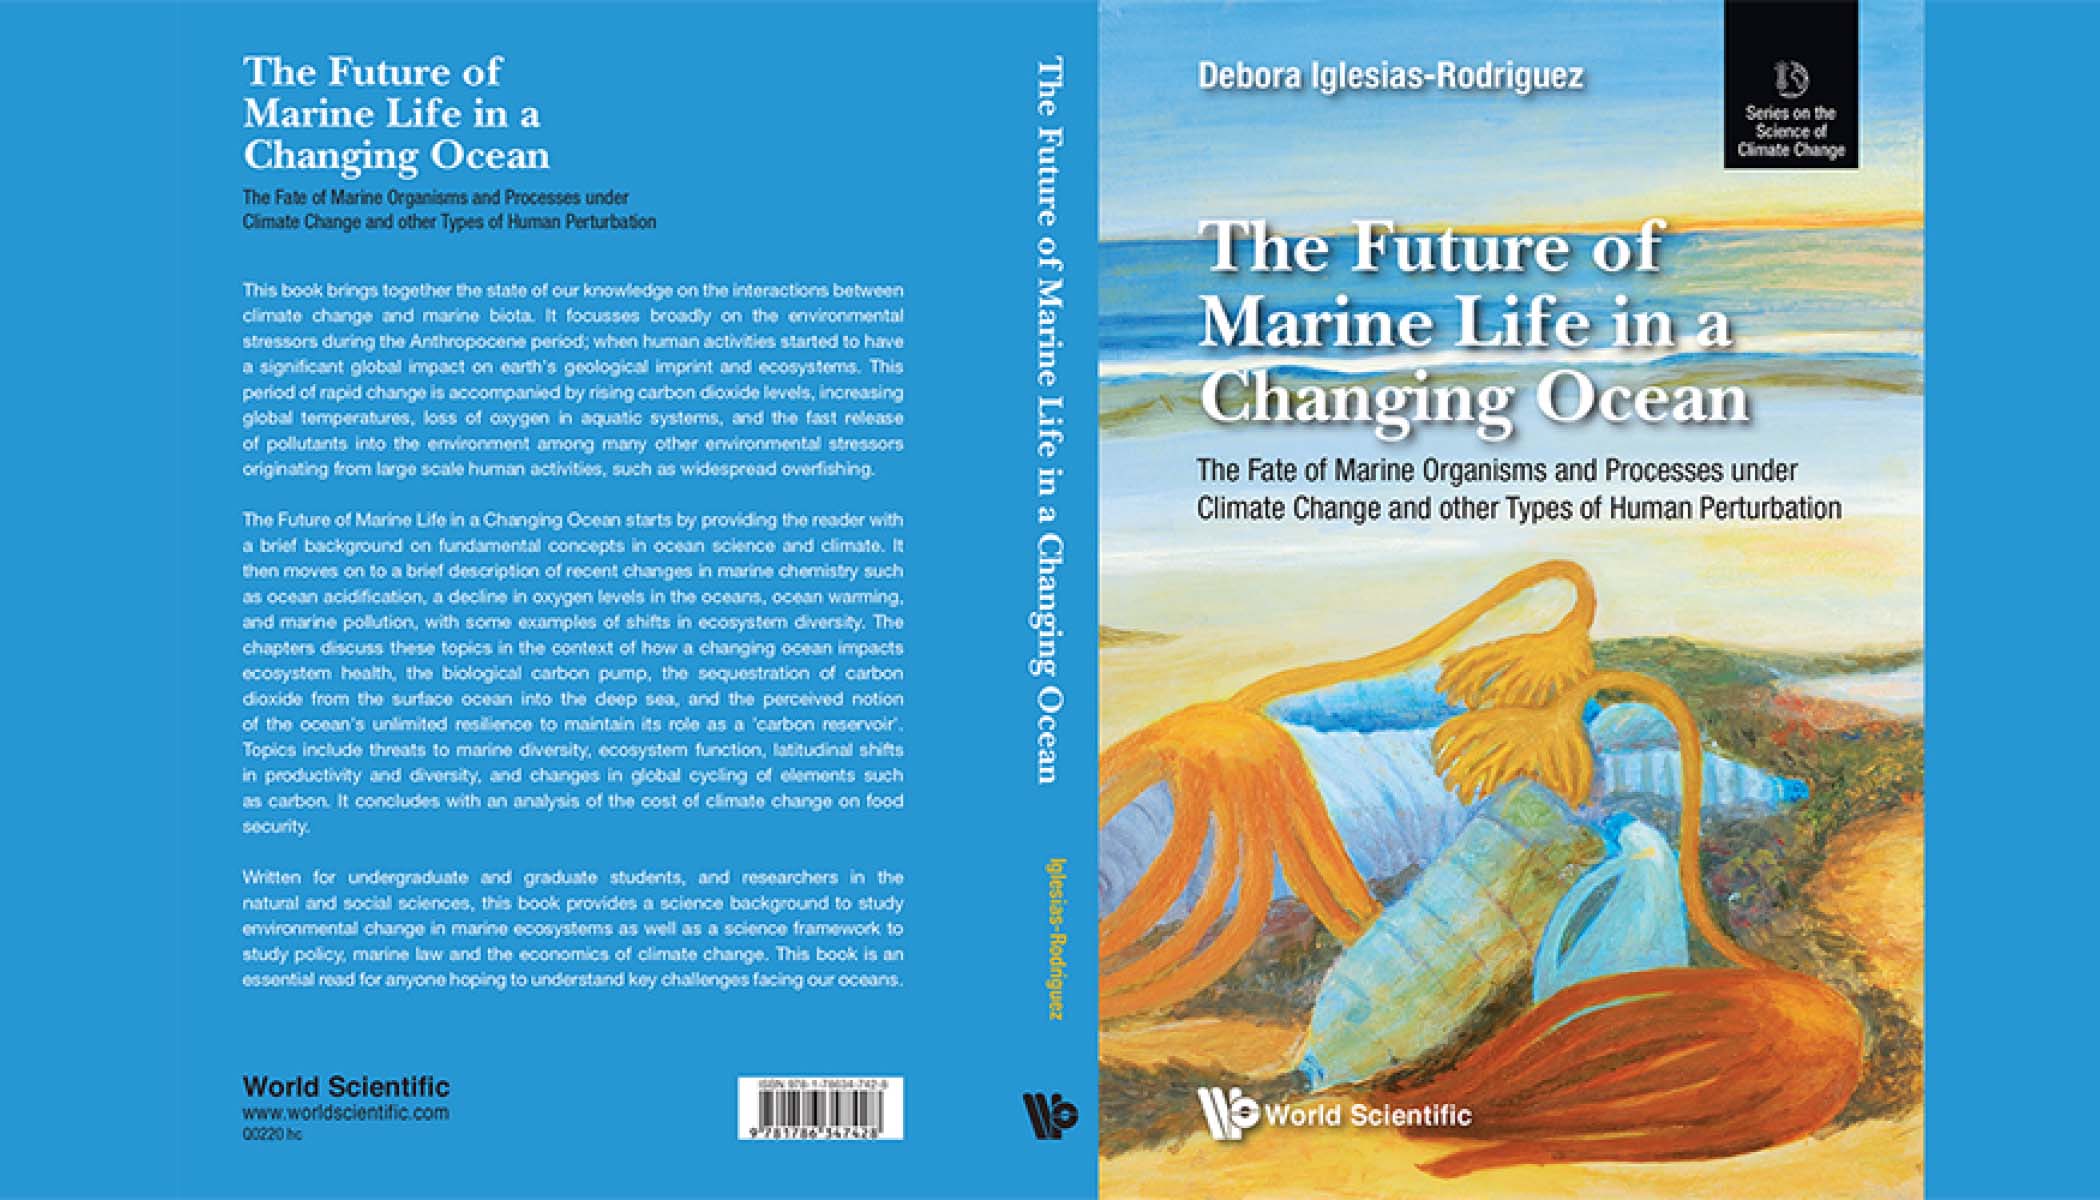 Front and back cover of book titled “The Future of Marine Life in a Changing Ocean.”